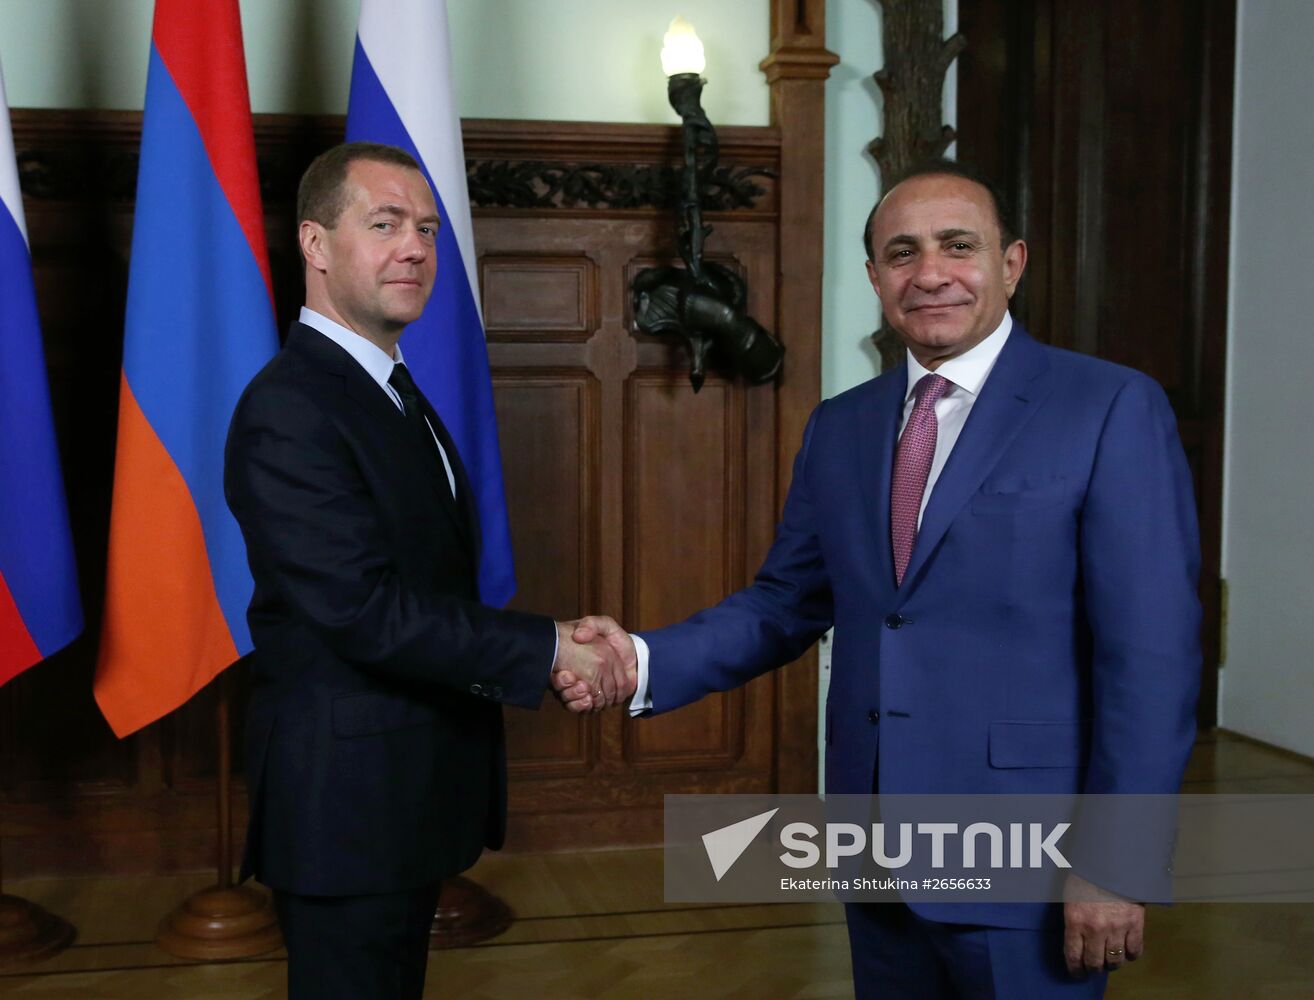 Prime Minister Dmitry Medvedev meets with his Armenian counterpart Ovik Abramyan